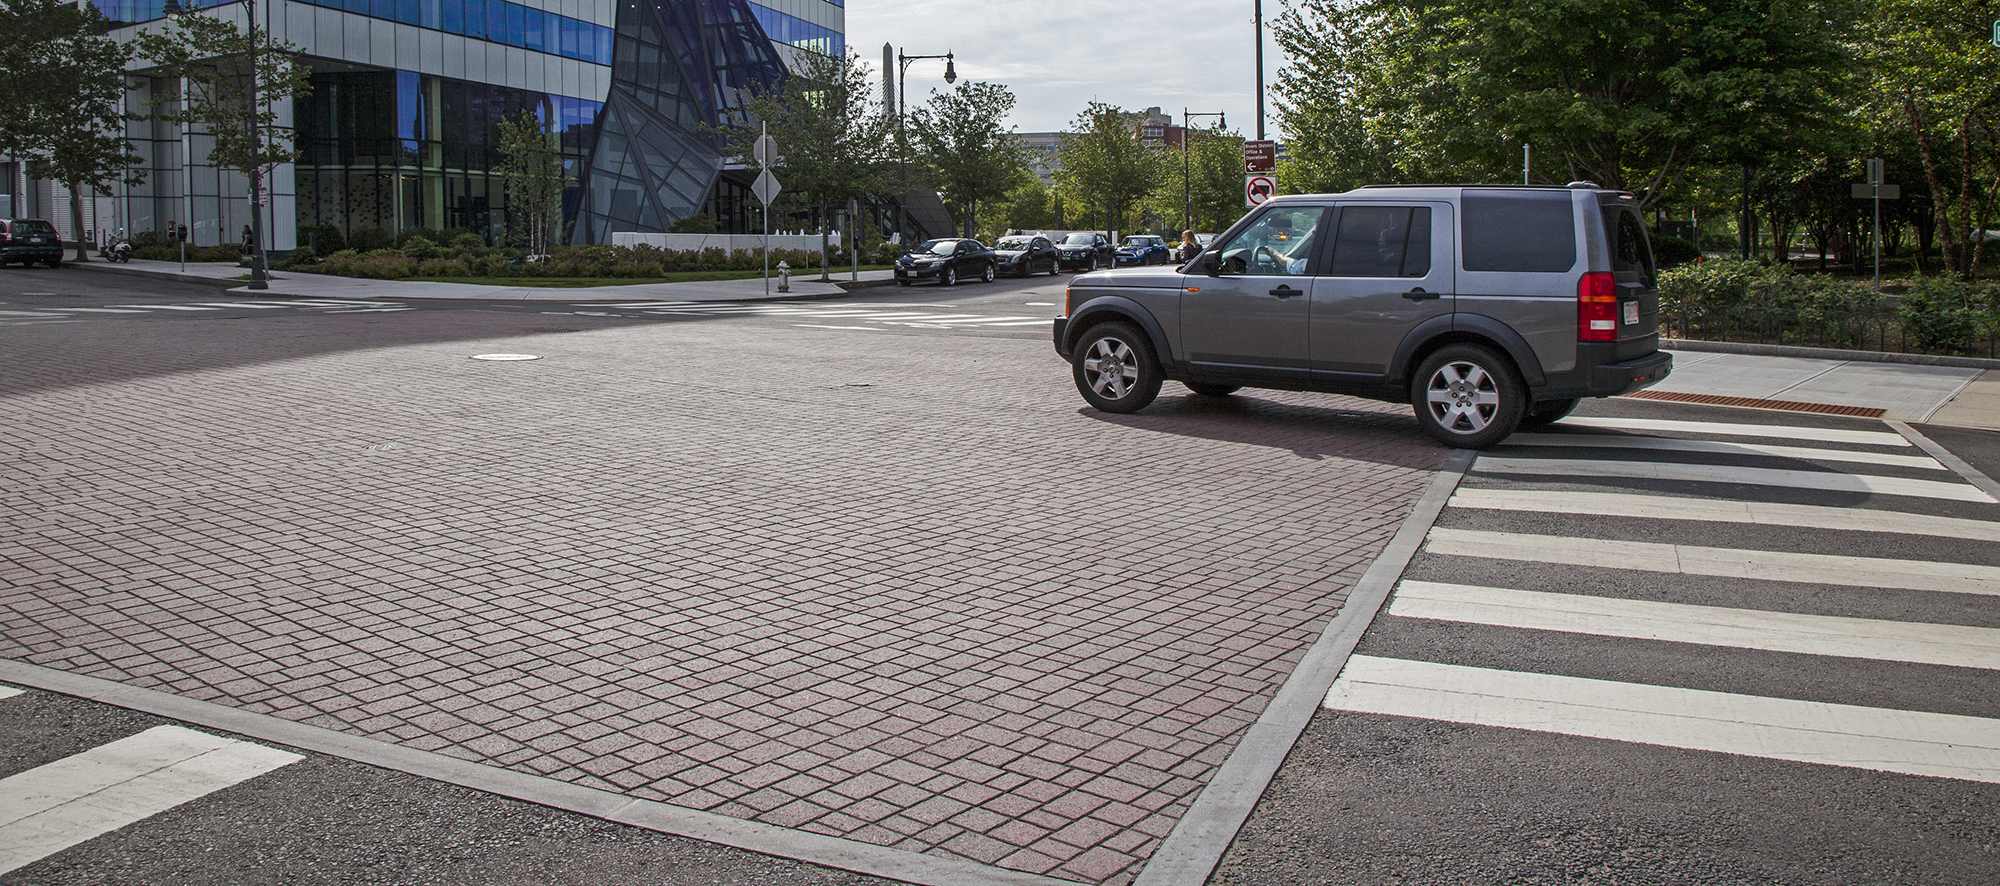 A vehicle, cyclist and pedestrian cross through the intersection, passing over a square paver bed of red Optiloc pavers.